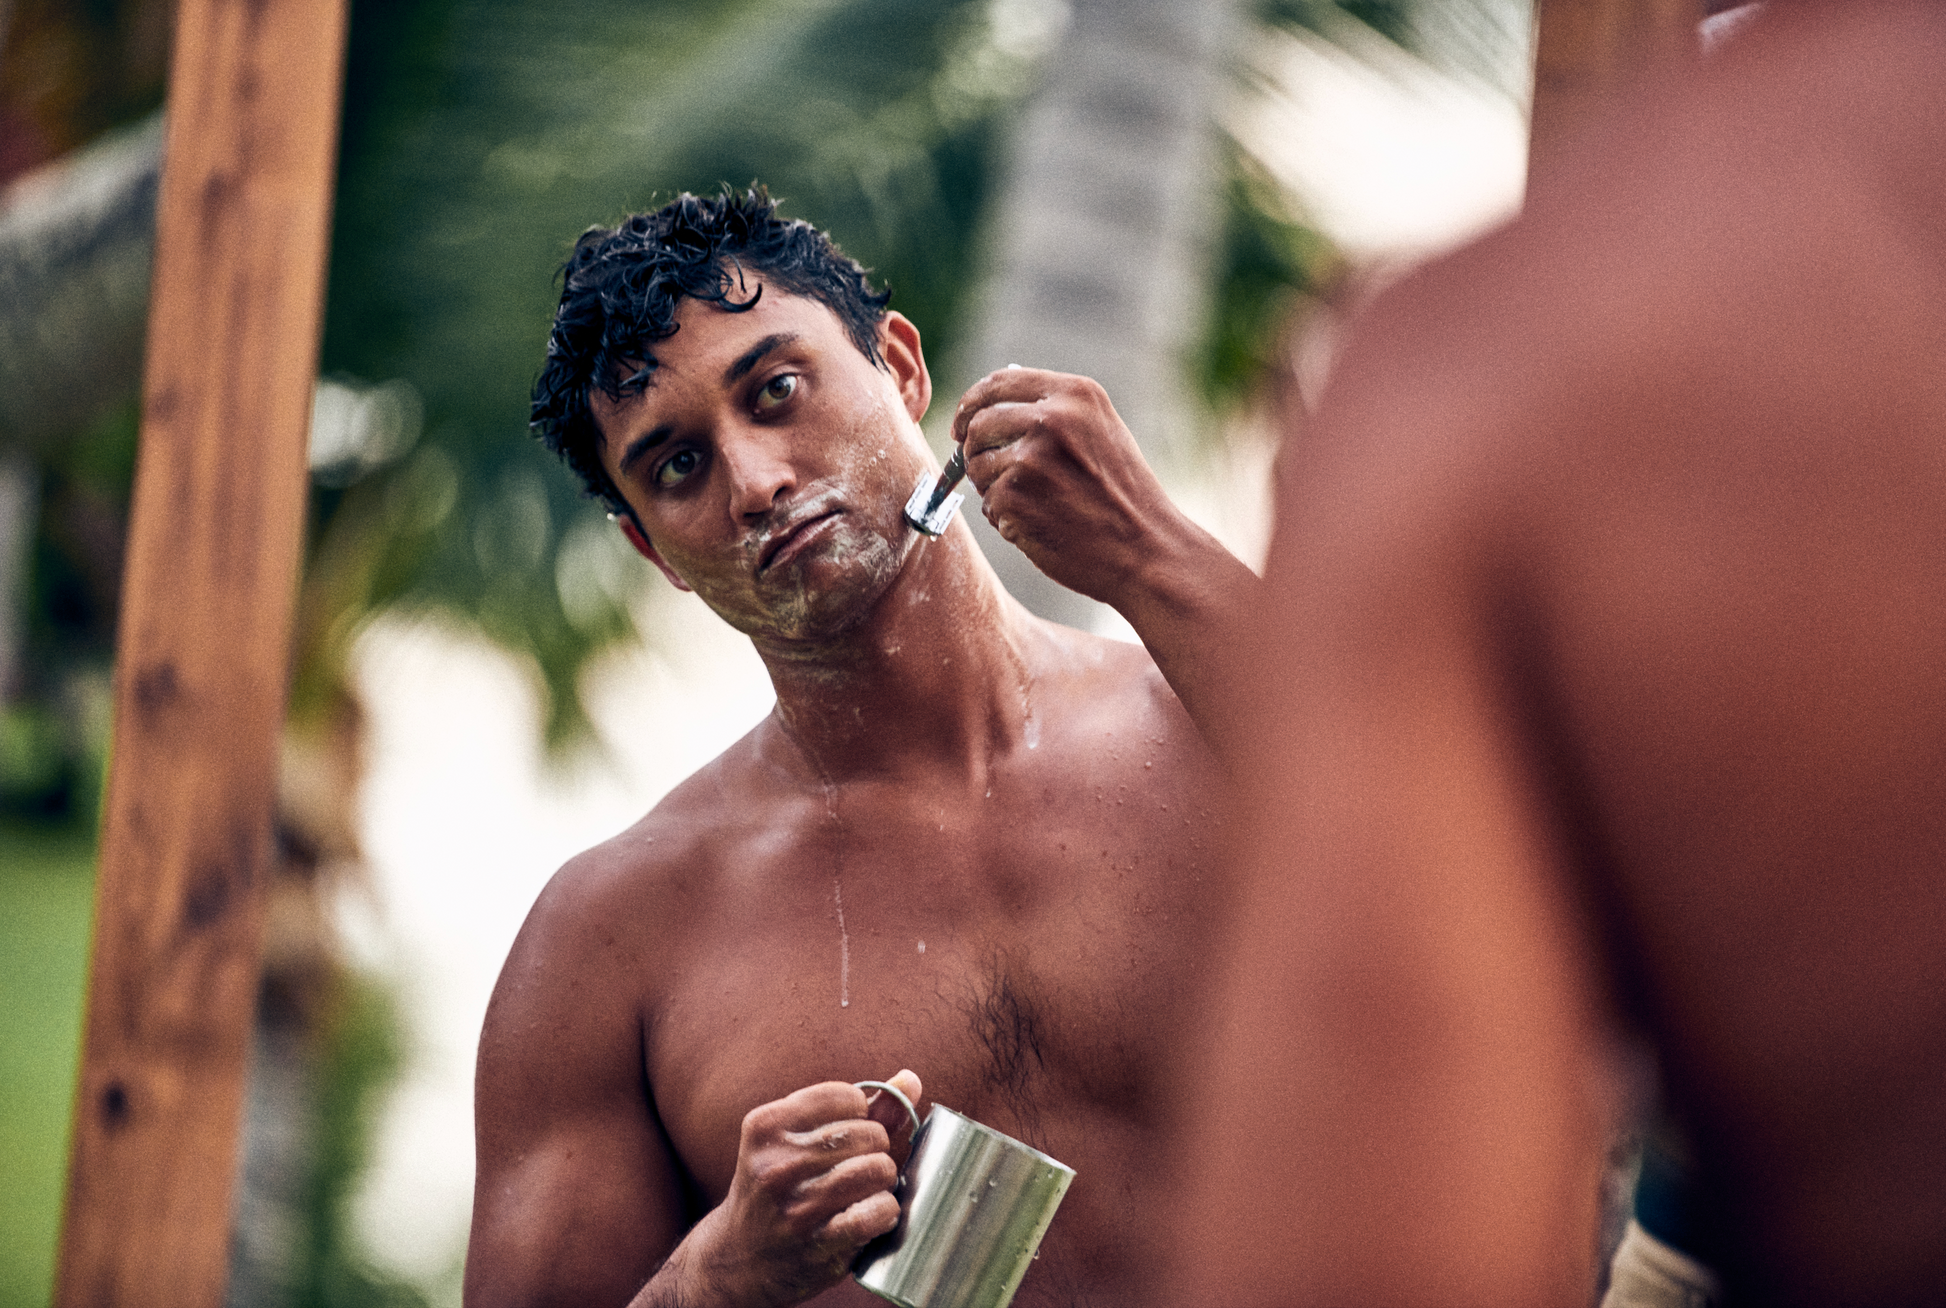 This image shows the Desesh premium quality solid body and face shave soap bar as an alternative to cans of shave foam or cream. This is a more eco friendly sustainable zero waste option and the shave bars come in biodegradable packaging. Shown here is a man shaving his face using a metal reusable safety razor and a solid shave soap bar for a plastic free sustainable shave routine